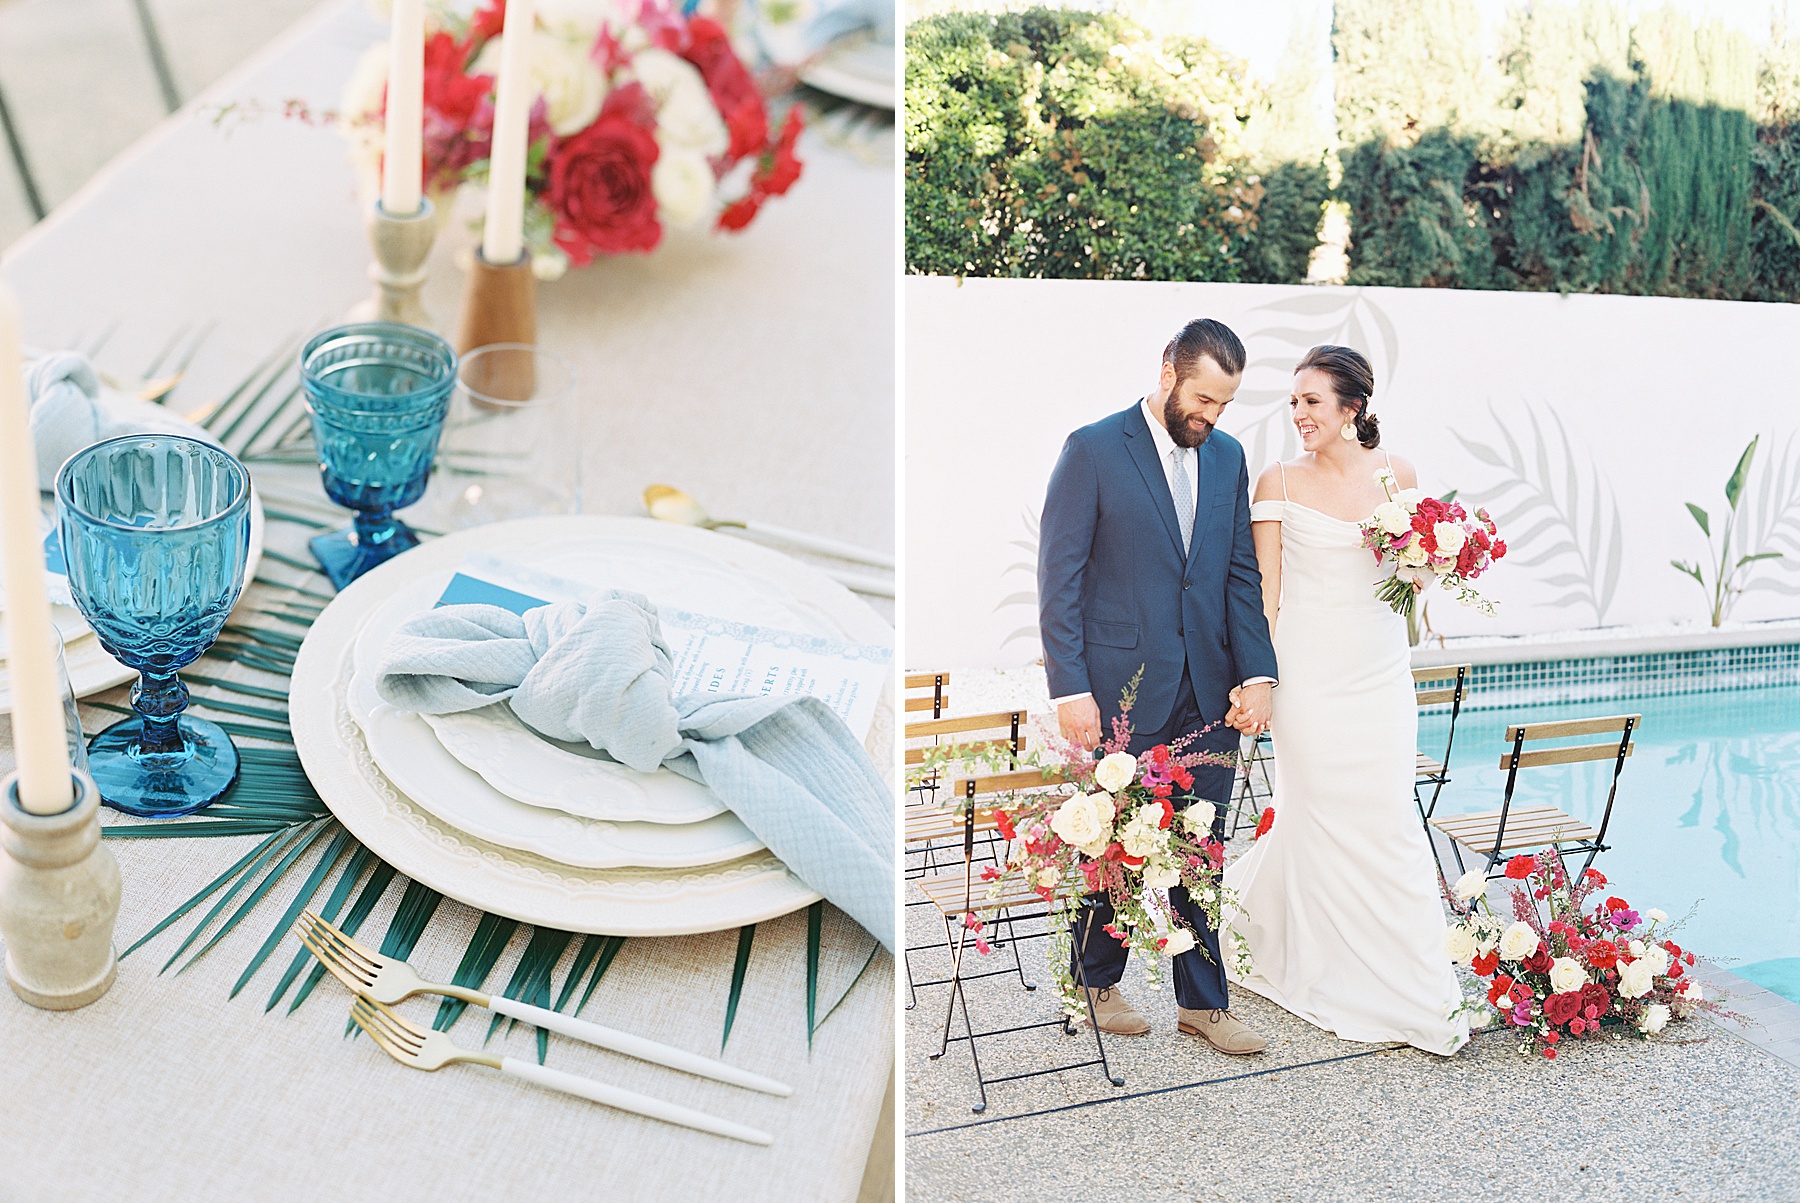 Grecian Inspired Micro-Wedding with Events by Kristina Elyse - Ash Baumgartner - Inspired by This - Sonoma Wedding Photographer_0023.jpg